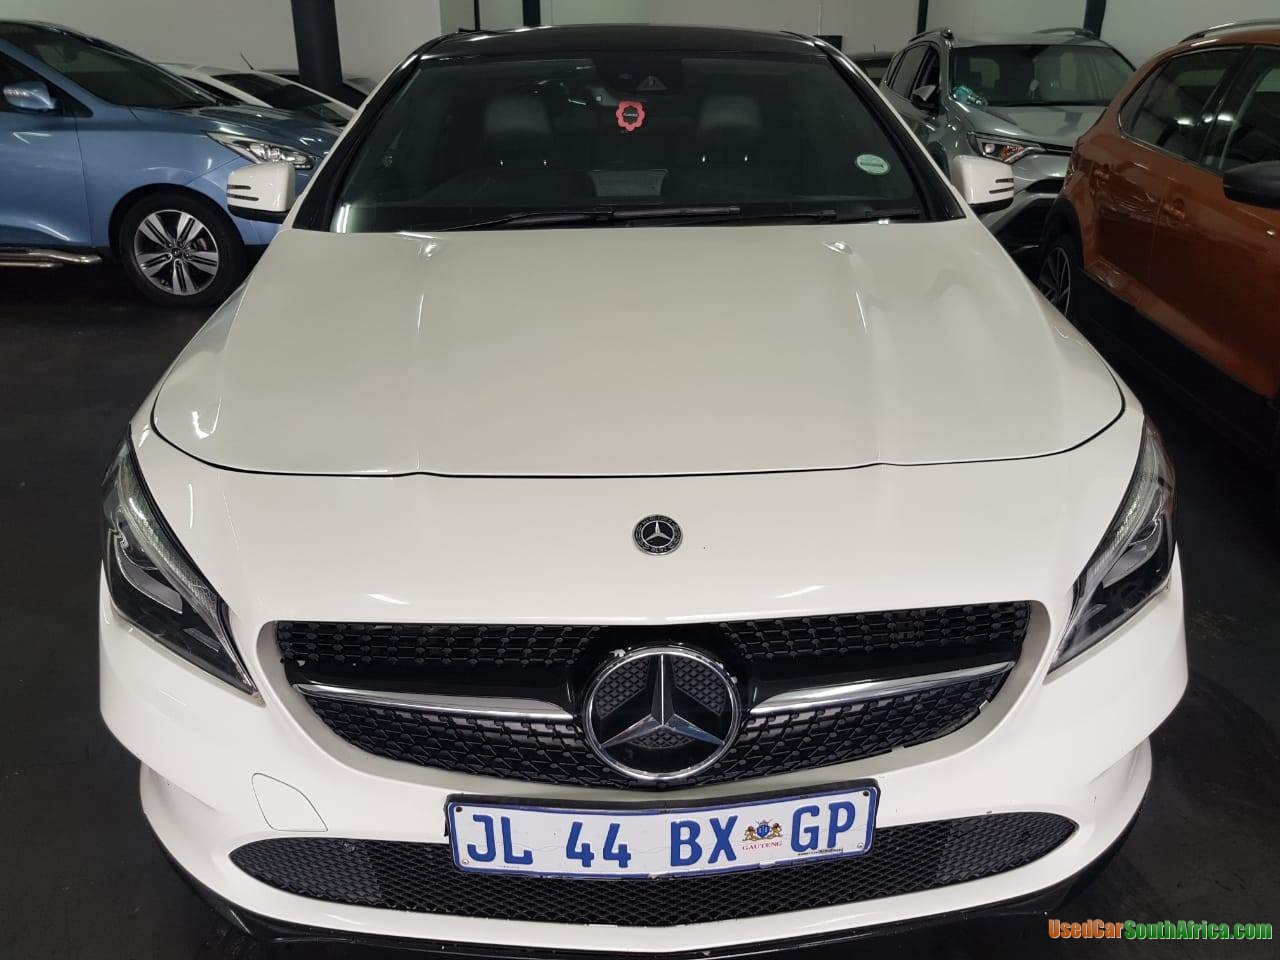 2017 Mercedes Benz CLA-Class CLA200D used car for sale in Johannesburg City Gauteng South Africa - OnlyCars.co.za